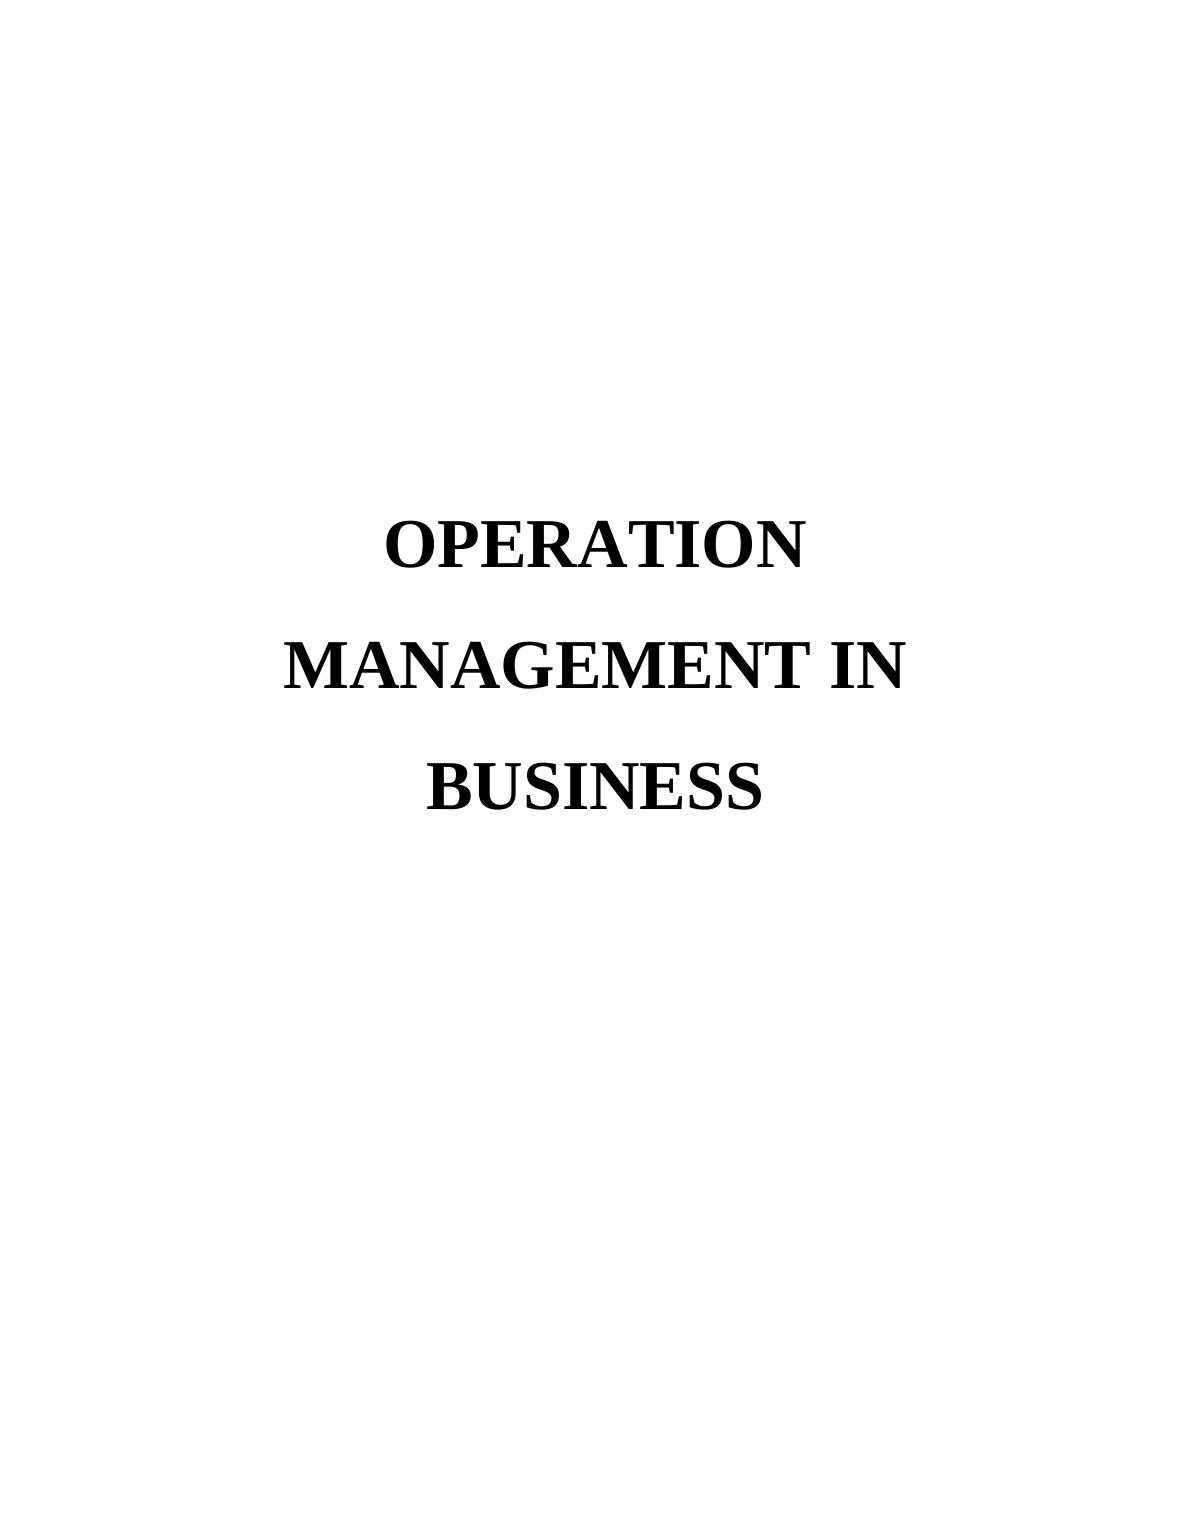 Report on Operation Management in Business - IKEA_1